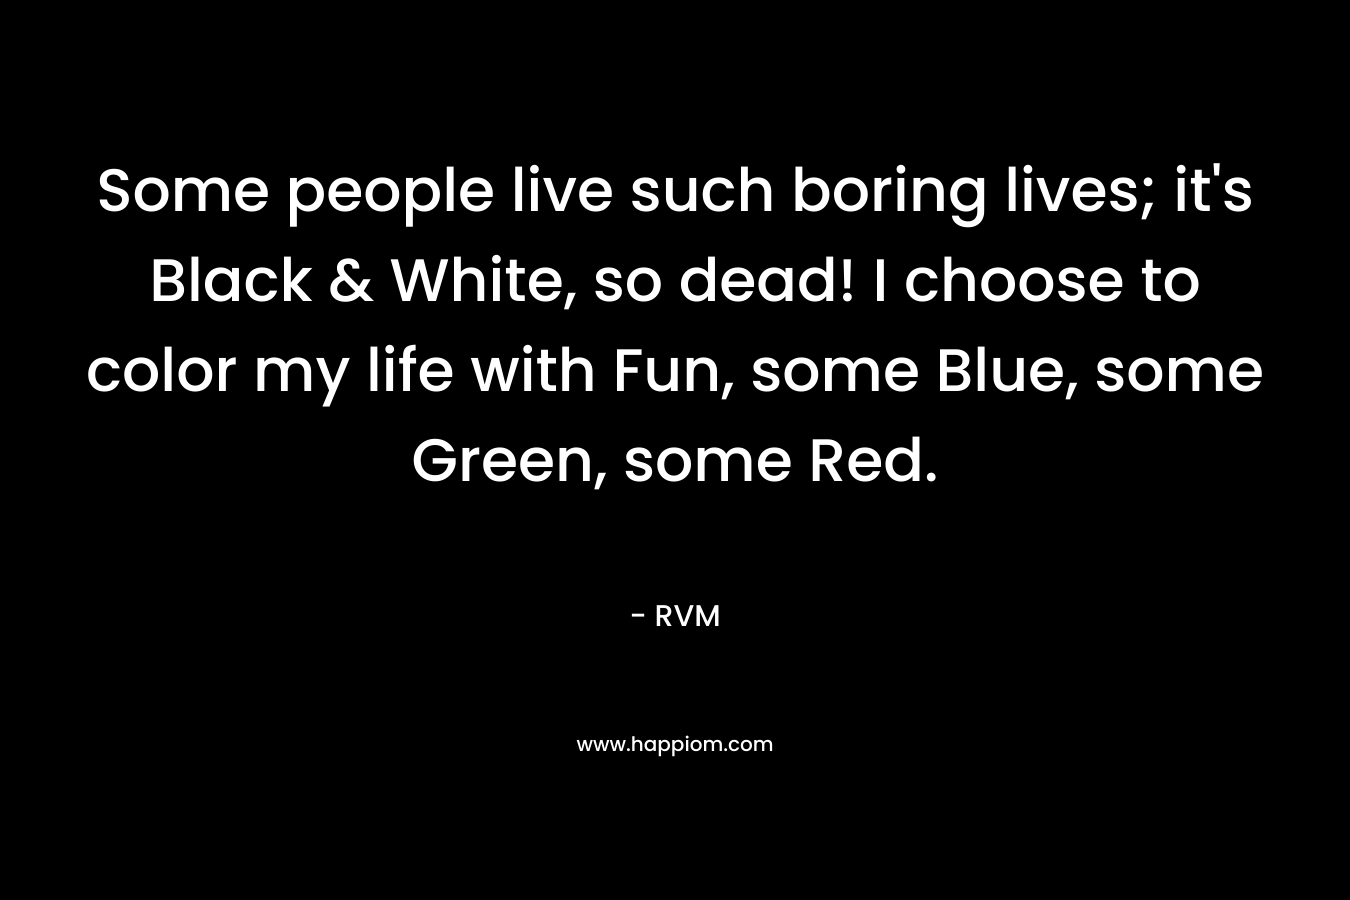 Some people live such boring lives; it's Black & White, so dead! I choose to color my life with Fun, some Blue, some Green, some Red.